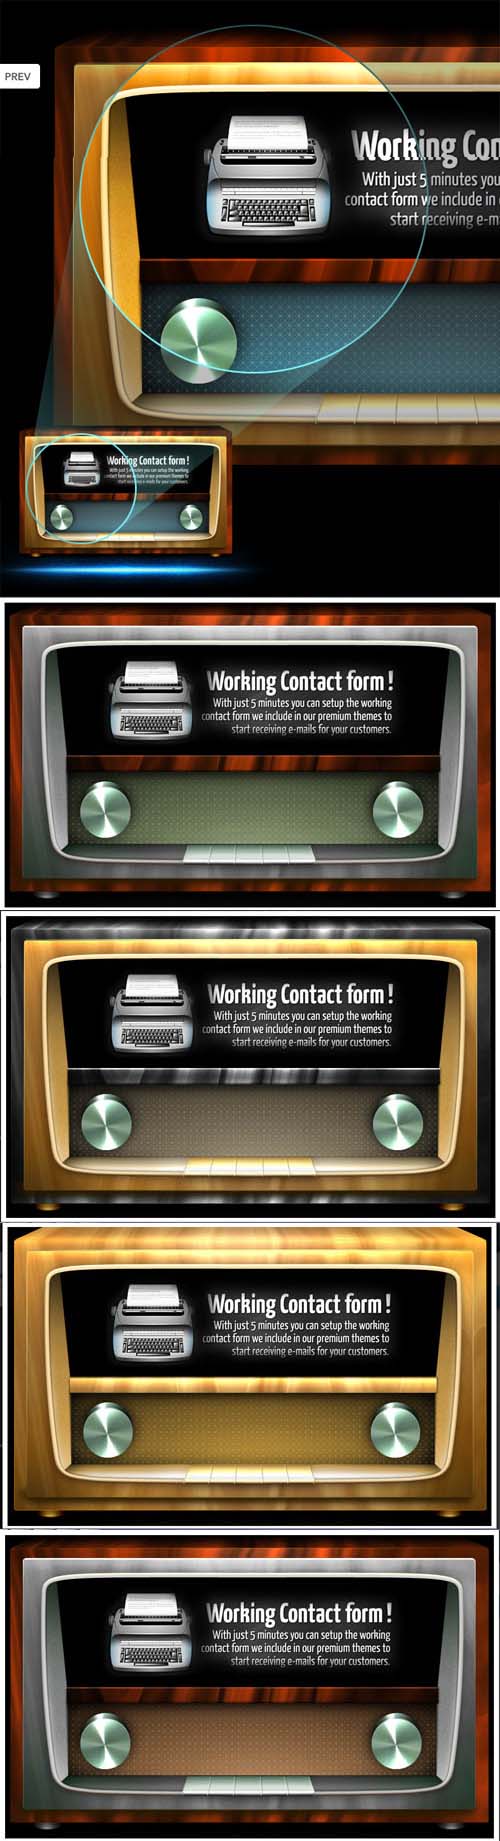 Working Contact Form Radio